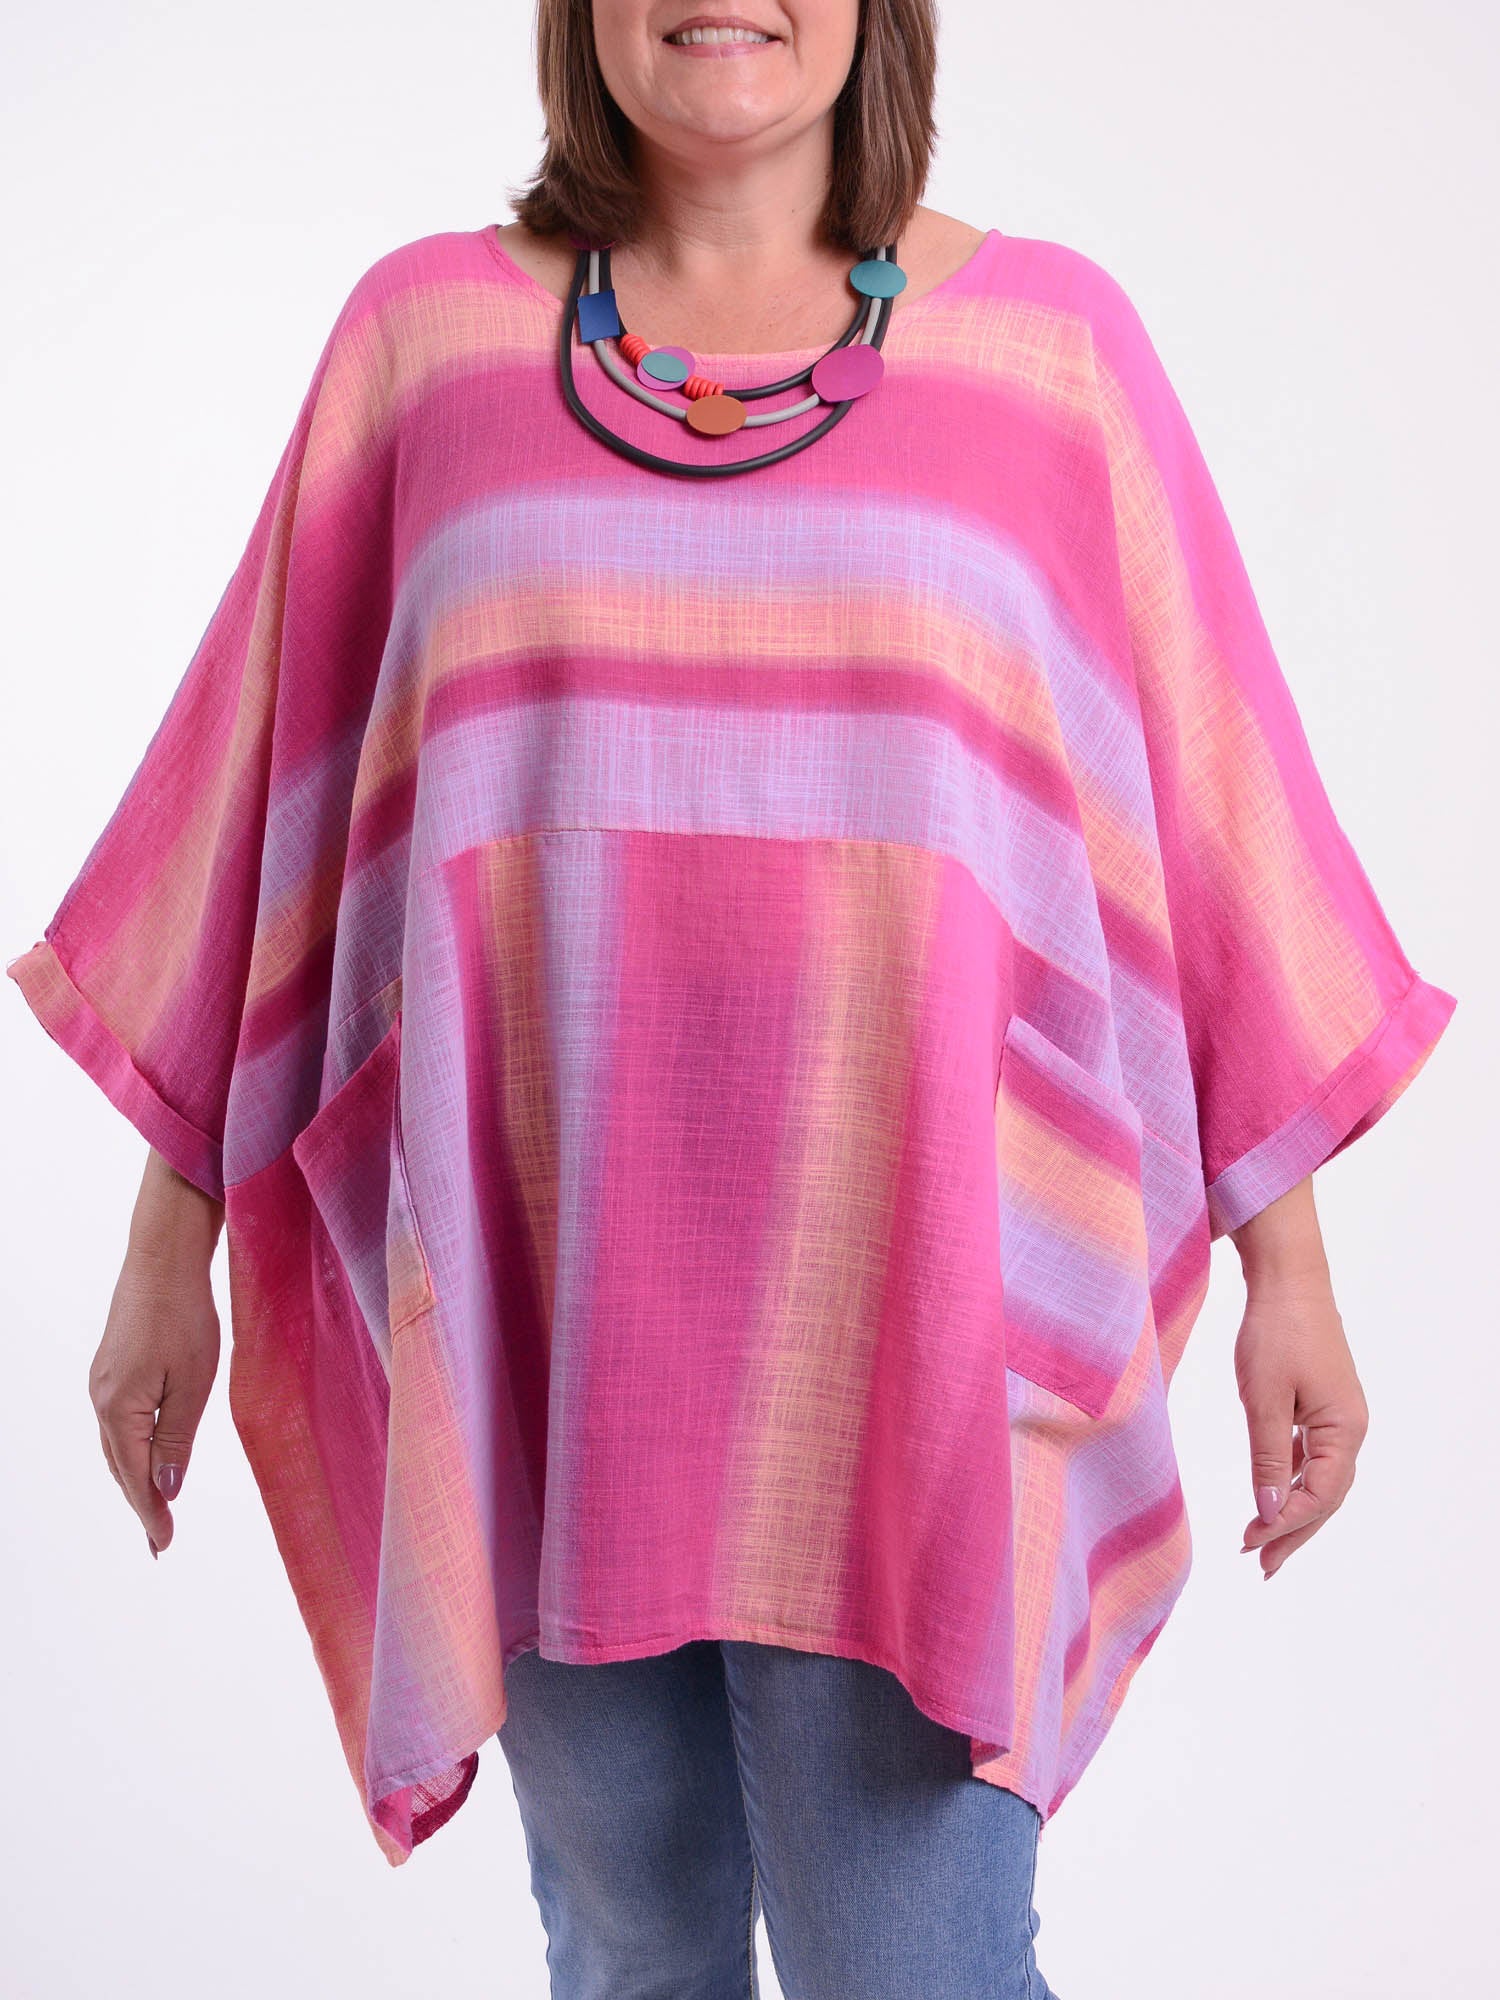 Lagenlook Oversized Cotton Striped Tunic -10077 STRIPE, Tops & Shirts, Pure Plus Clothing, Lagenlook Clothing, Plus Size Fashion, Over 50 Fashion